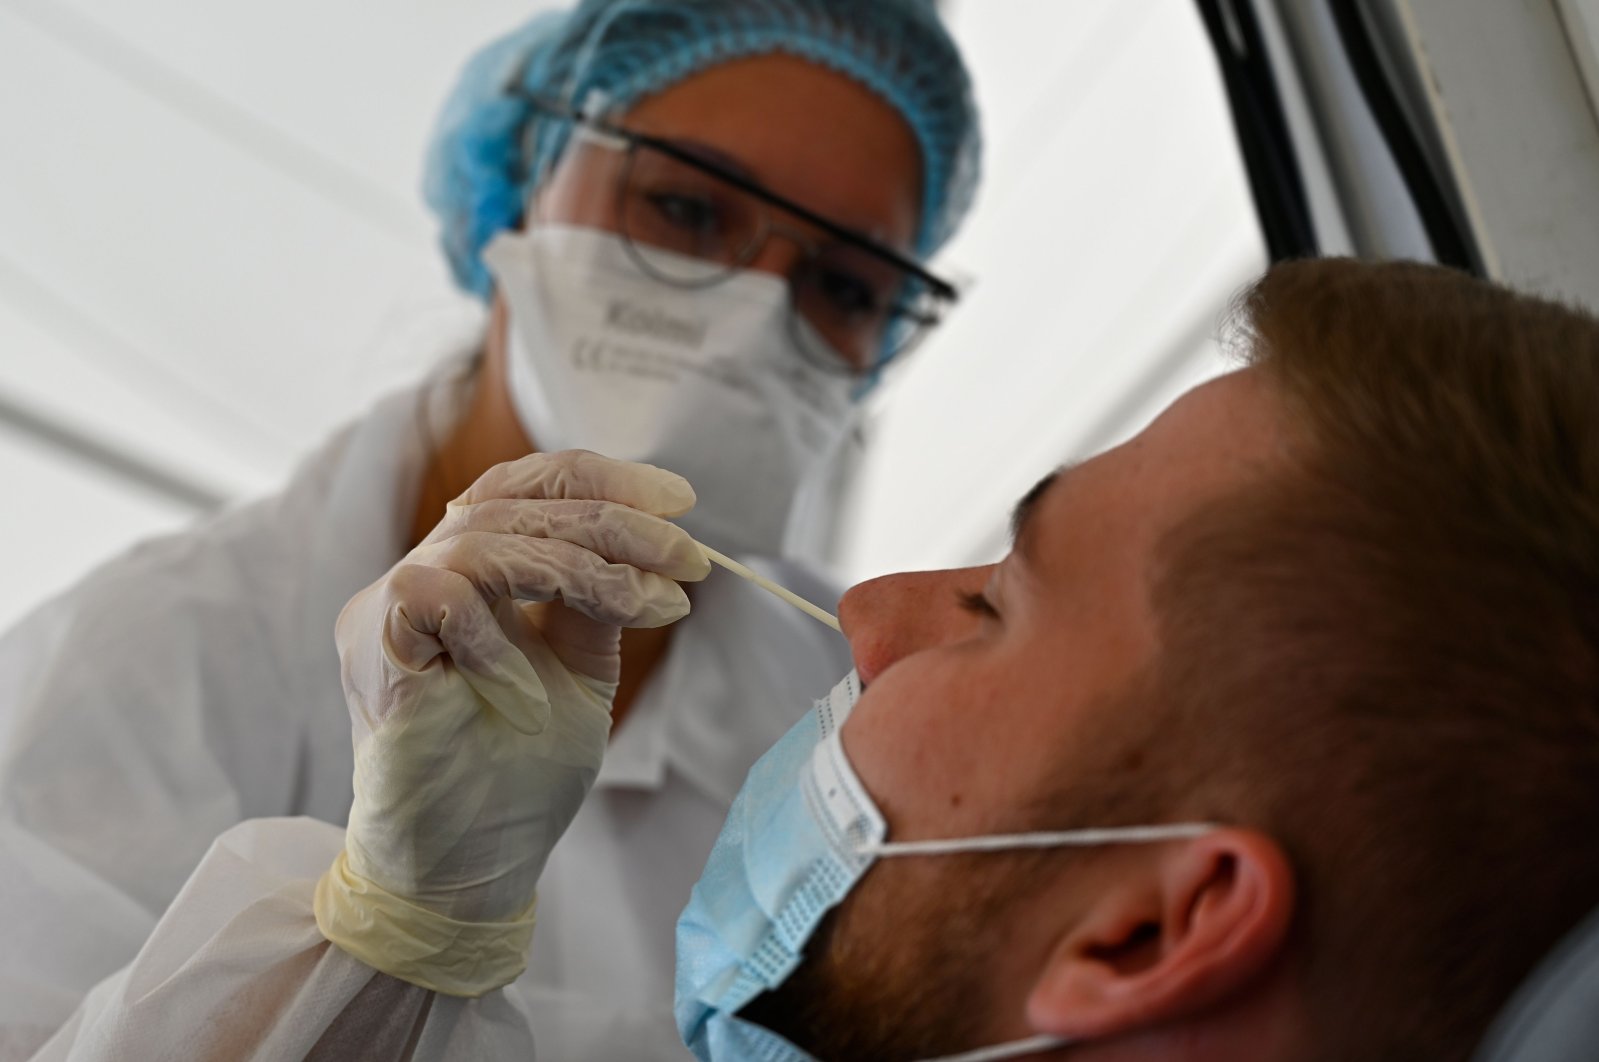 A health official collects a nasal swab sample from a man for a COVID-19 coronavirus test in a "COVID Drive" at the University Hospital Center (CHU) in Rennes, western France, Sept. 7, 2020. (AFP Photo)